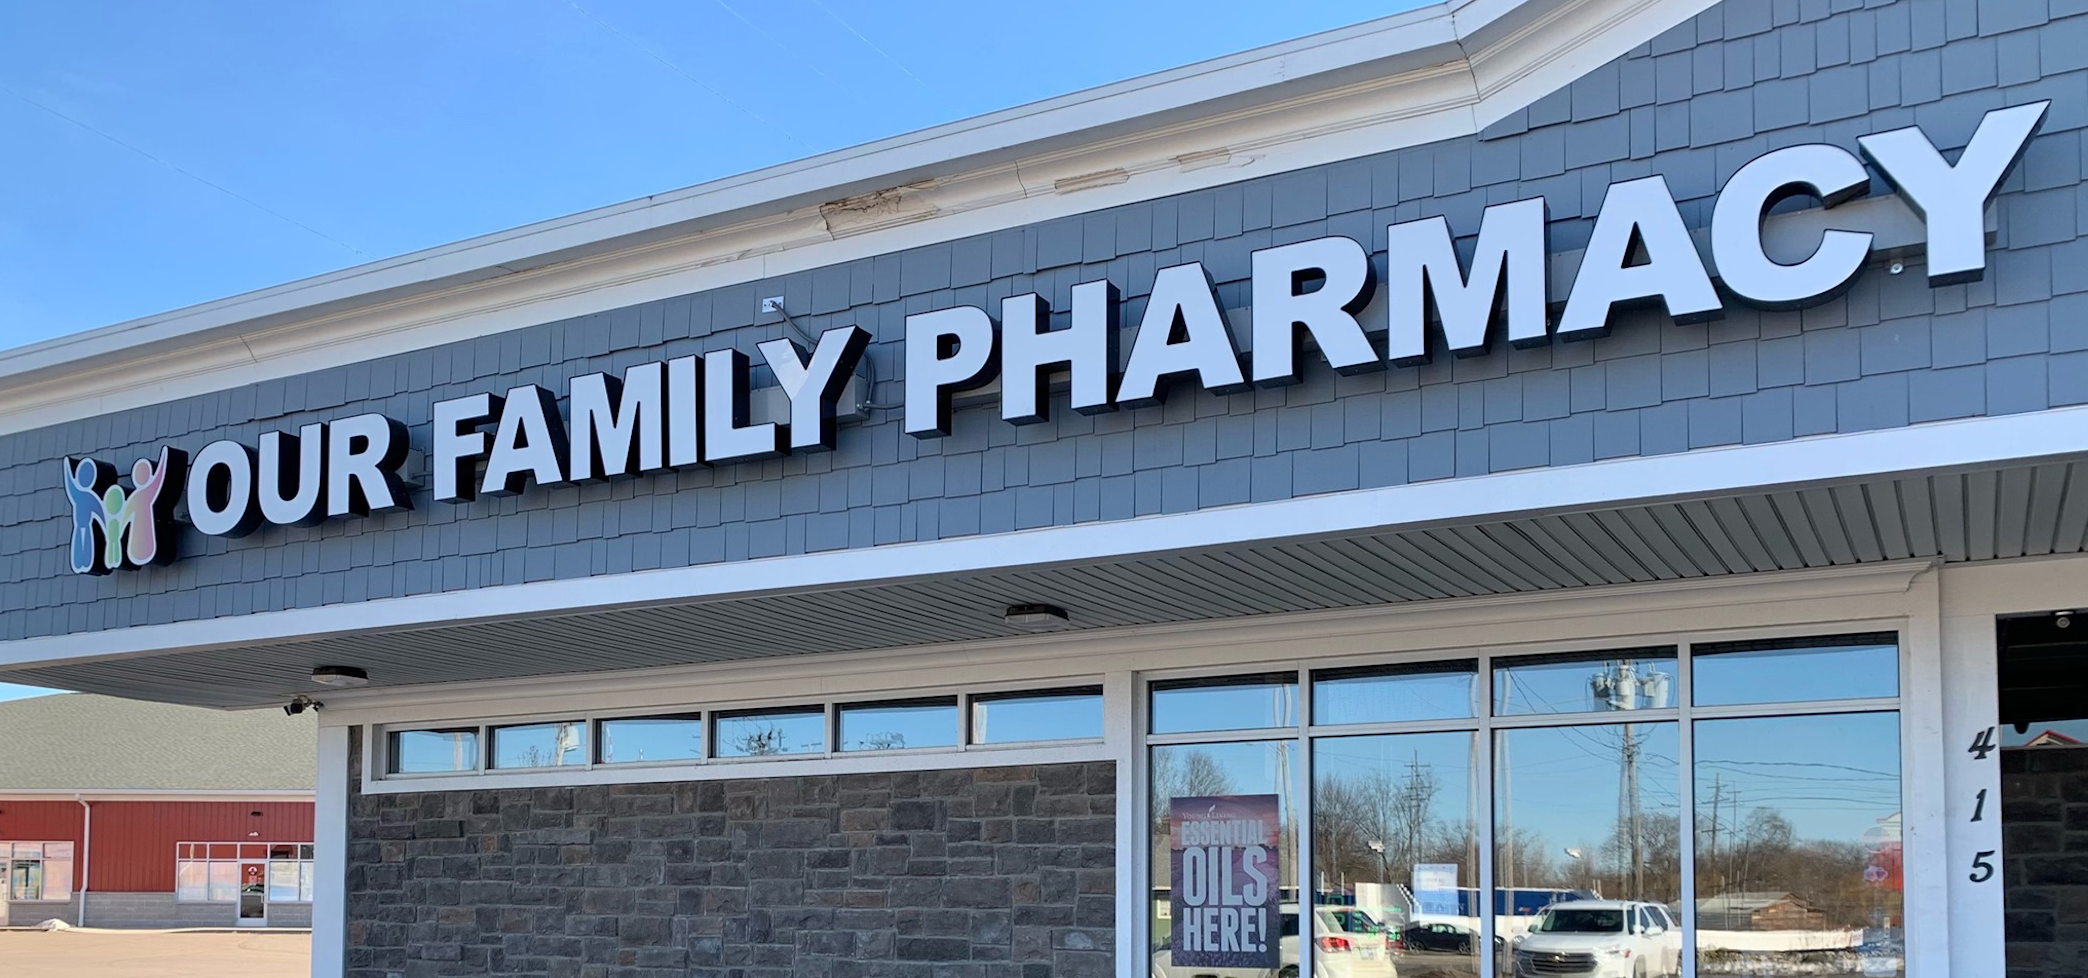 Welcome to Our Family Pharmacy